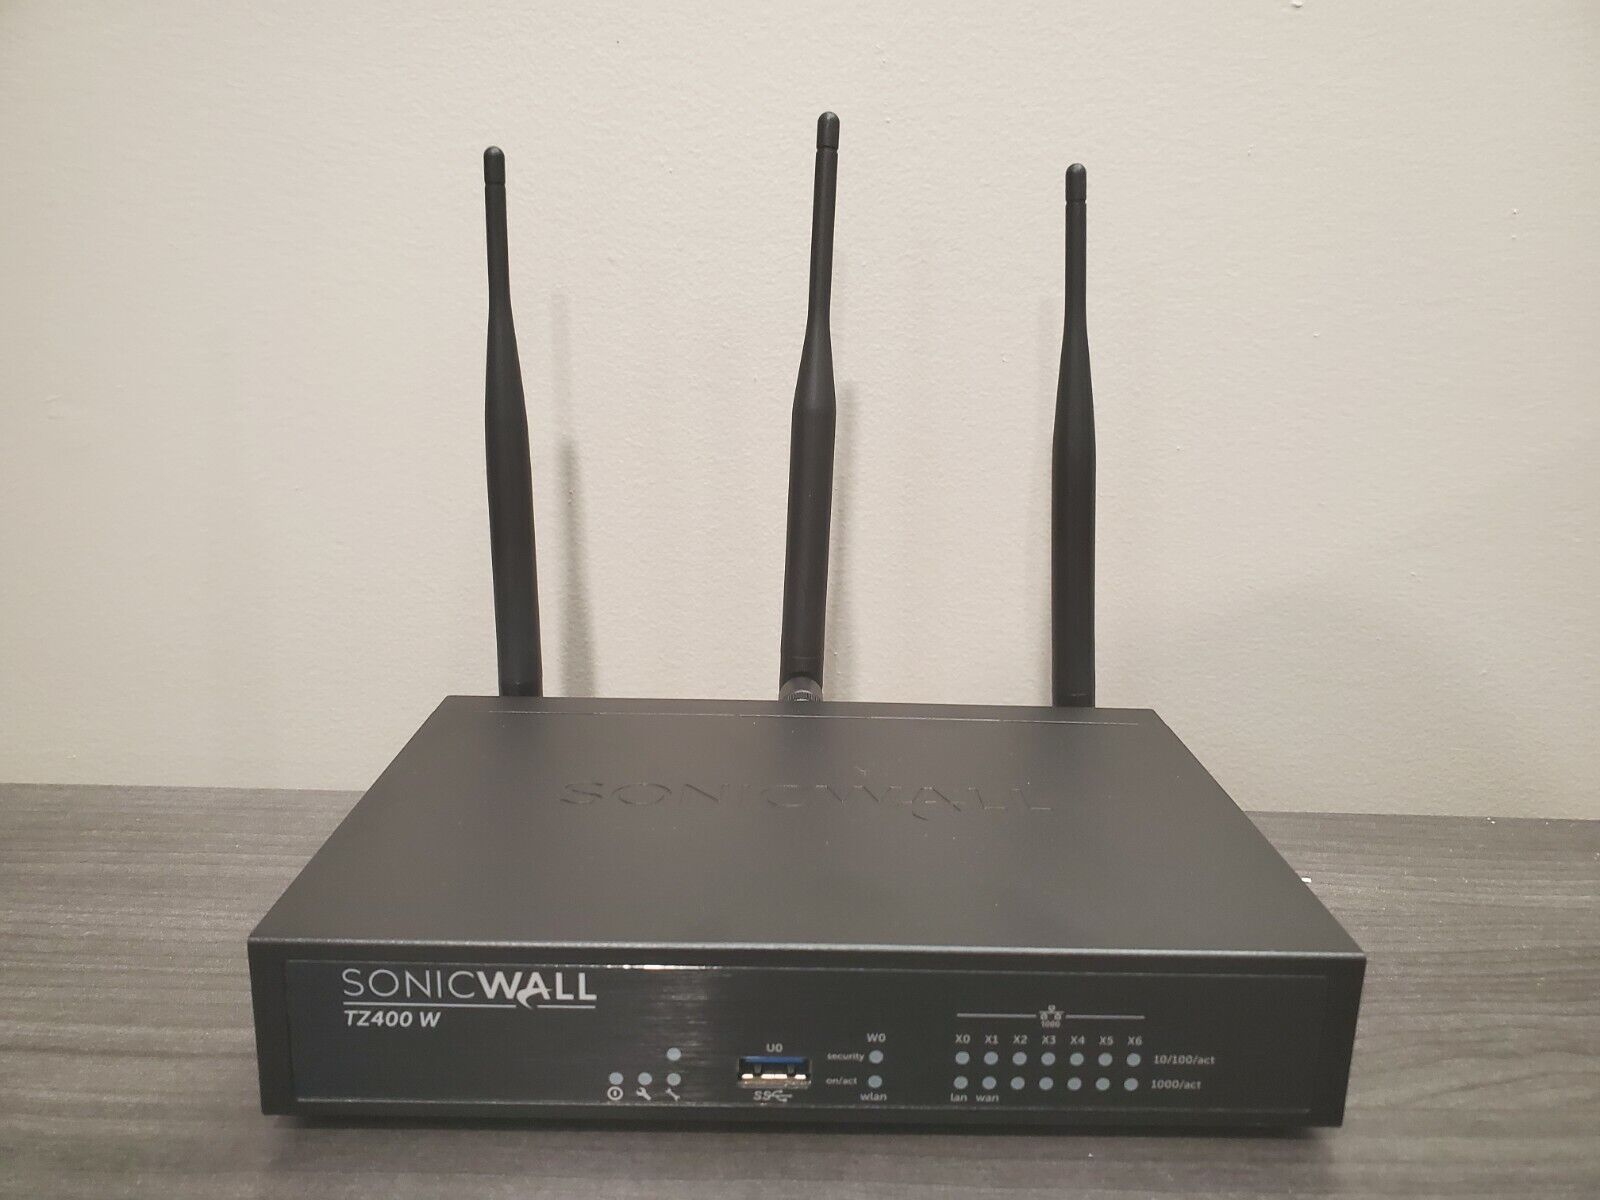 Sonicwall Tz400w Firewall Network Security Router TRANSFER READY LATEST FIRMWARE